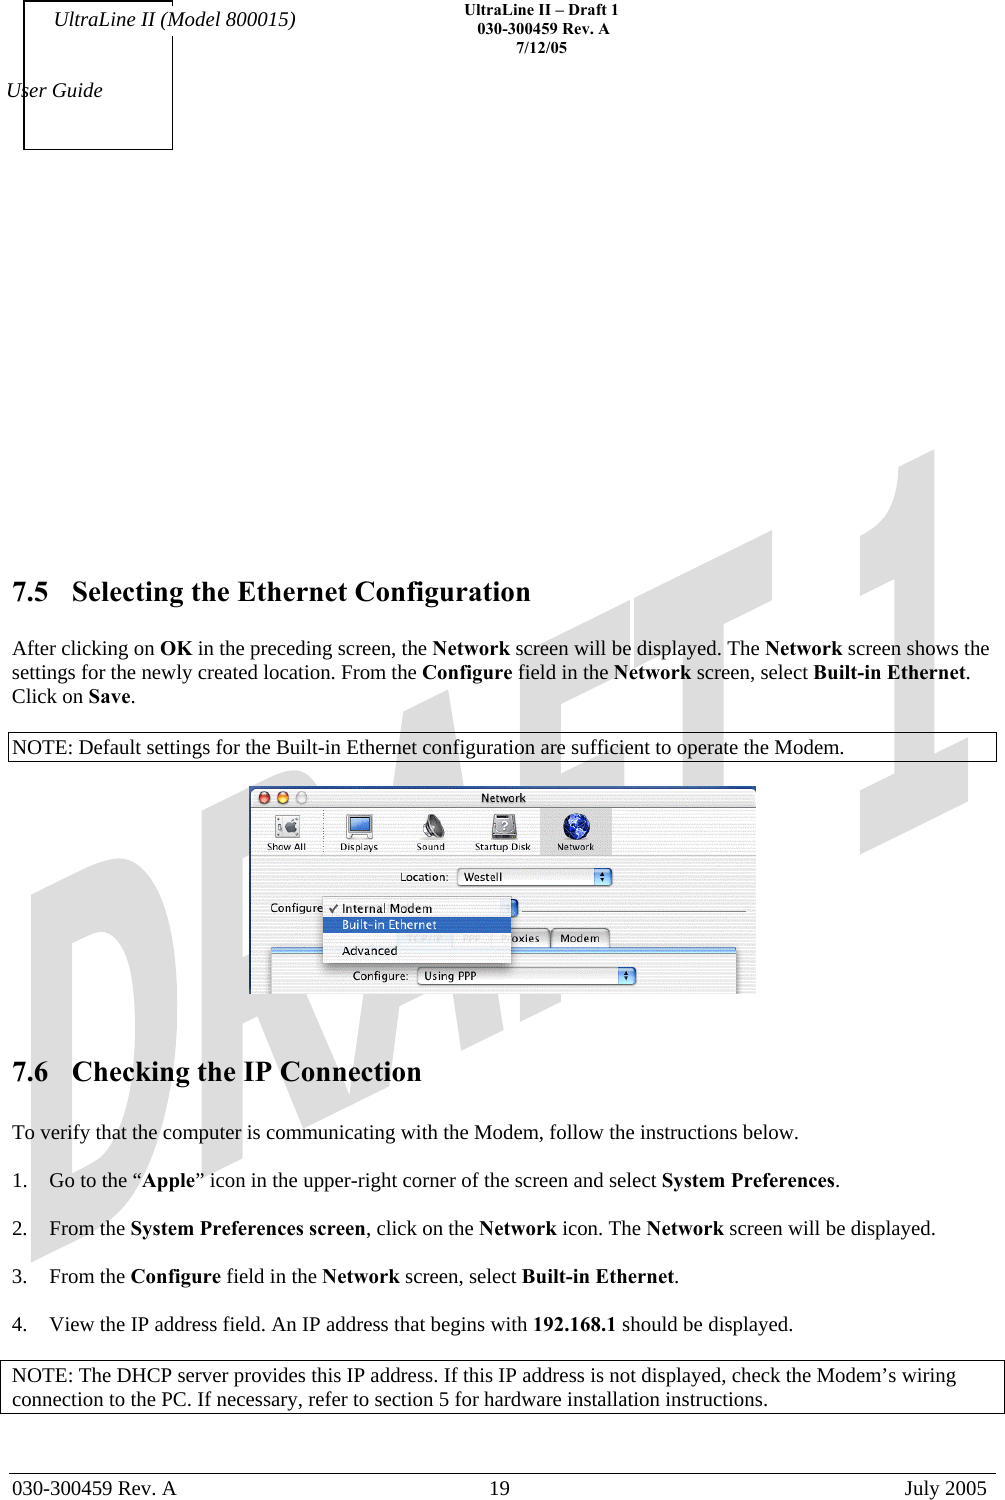    UltraLine II – Draft 1   030-300459 Rev. A 7/12/05   030-300459 Rev. A  19  July 2005  User Guide UltraLine II (Model 800015)             7.5  Selecting the Ethernet Configuration  After clicking on OK in the preceding screen, the Network screen will be displayed. The Network screen shows the settings for the newly created location. From the Configure field in the Network screen, select Built-in Ethernet. Click on Save.  NOTE: Default settings for the Built-in Ethernet configuration are sufficient to operate the Modem.      7.6  Checking the IP Connection  To verify that the computer is communicating with the Modem, follow the instructions below.  1.  Go to the “Apple” icon in the upper-right corner of the screen and select System Preferences.  2. From the System Preferences screen, click on the Network icon. The Network screen will be displayed.  3. From the Configure field in the Network screen, select Built-in Ethernet.  4.  View the IP address field. An IP address that begins with 192.168.1 should be displayed.  NOTE: The DHCP server provides this IP address. If this IP address is not displayed, check the Modem’s wiring connection to the PC. If necessary, refer to section 5 for hardware installation instructions.  